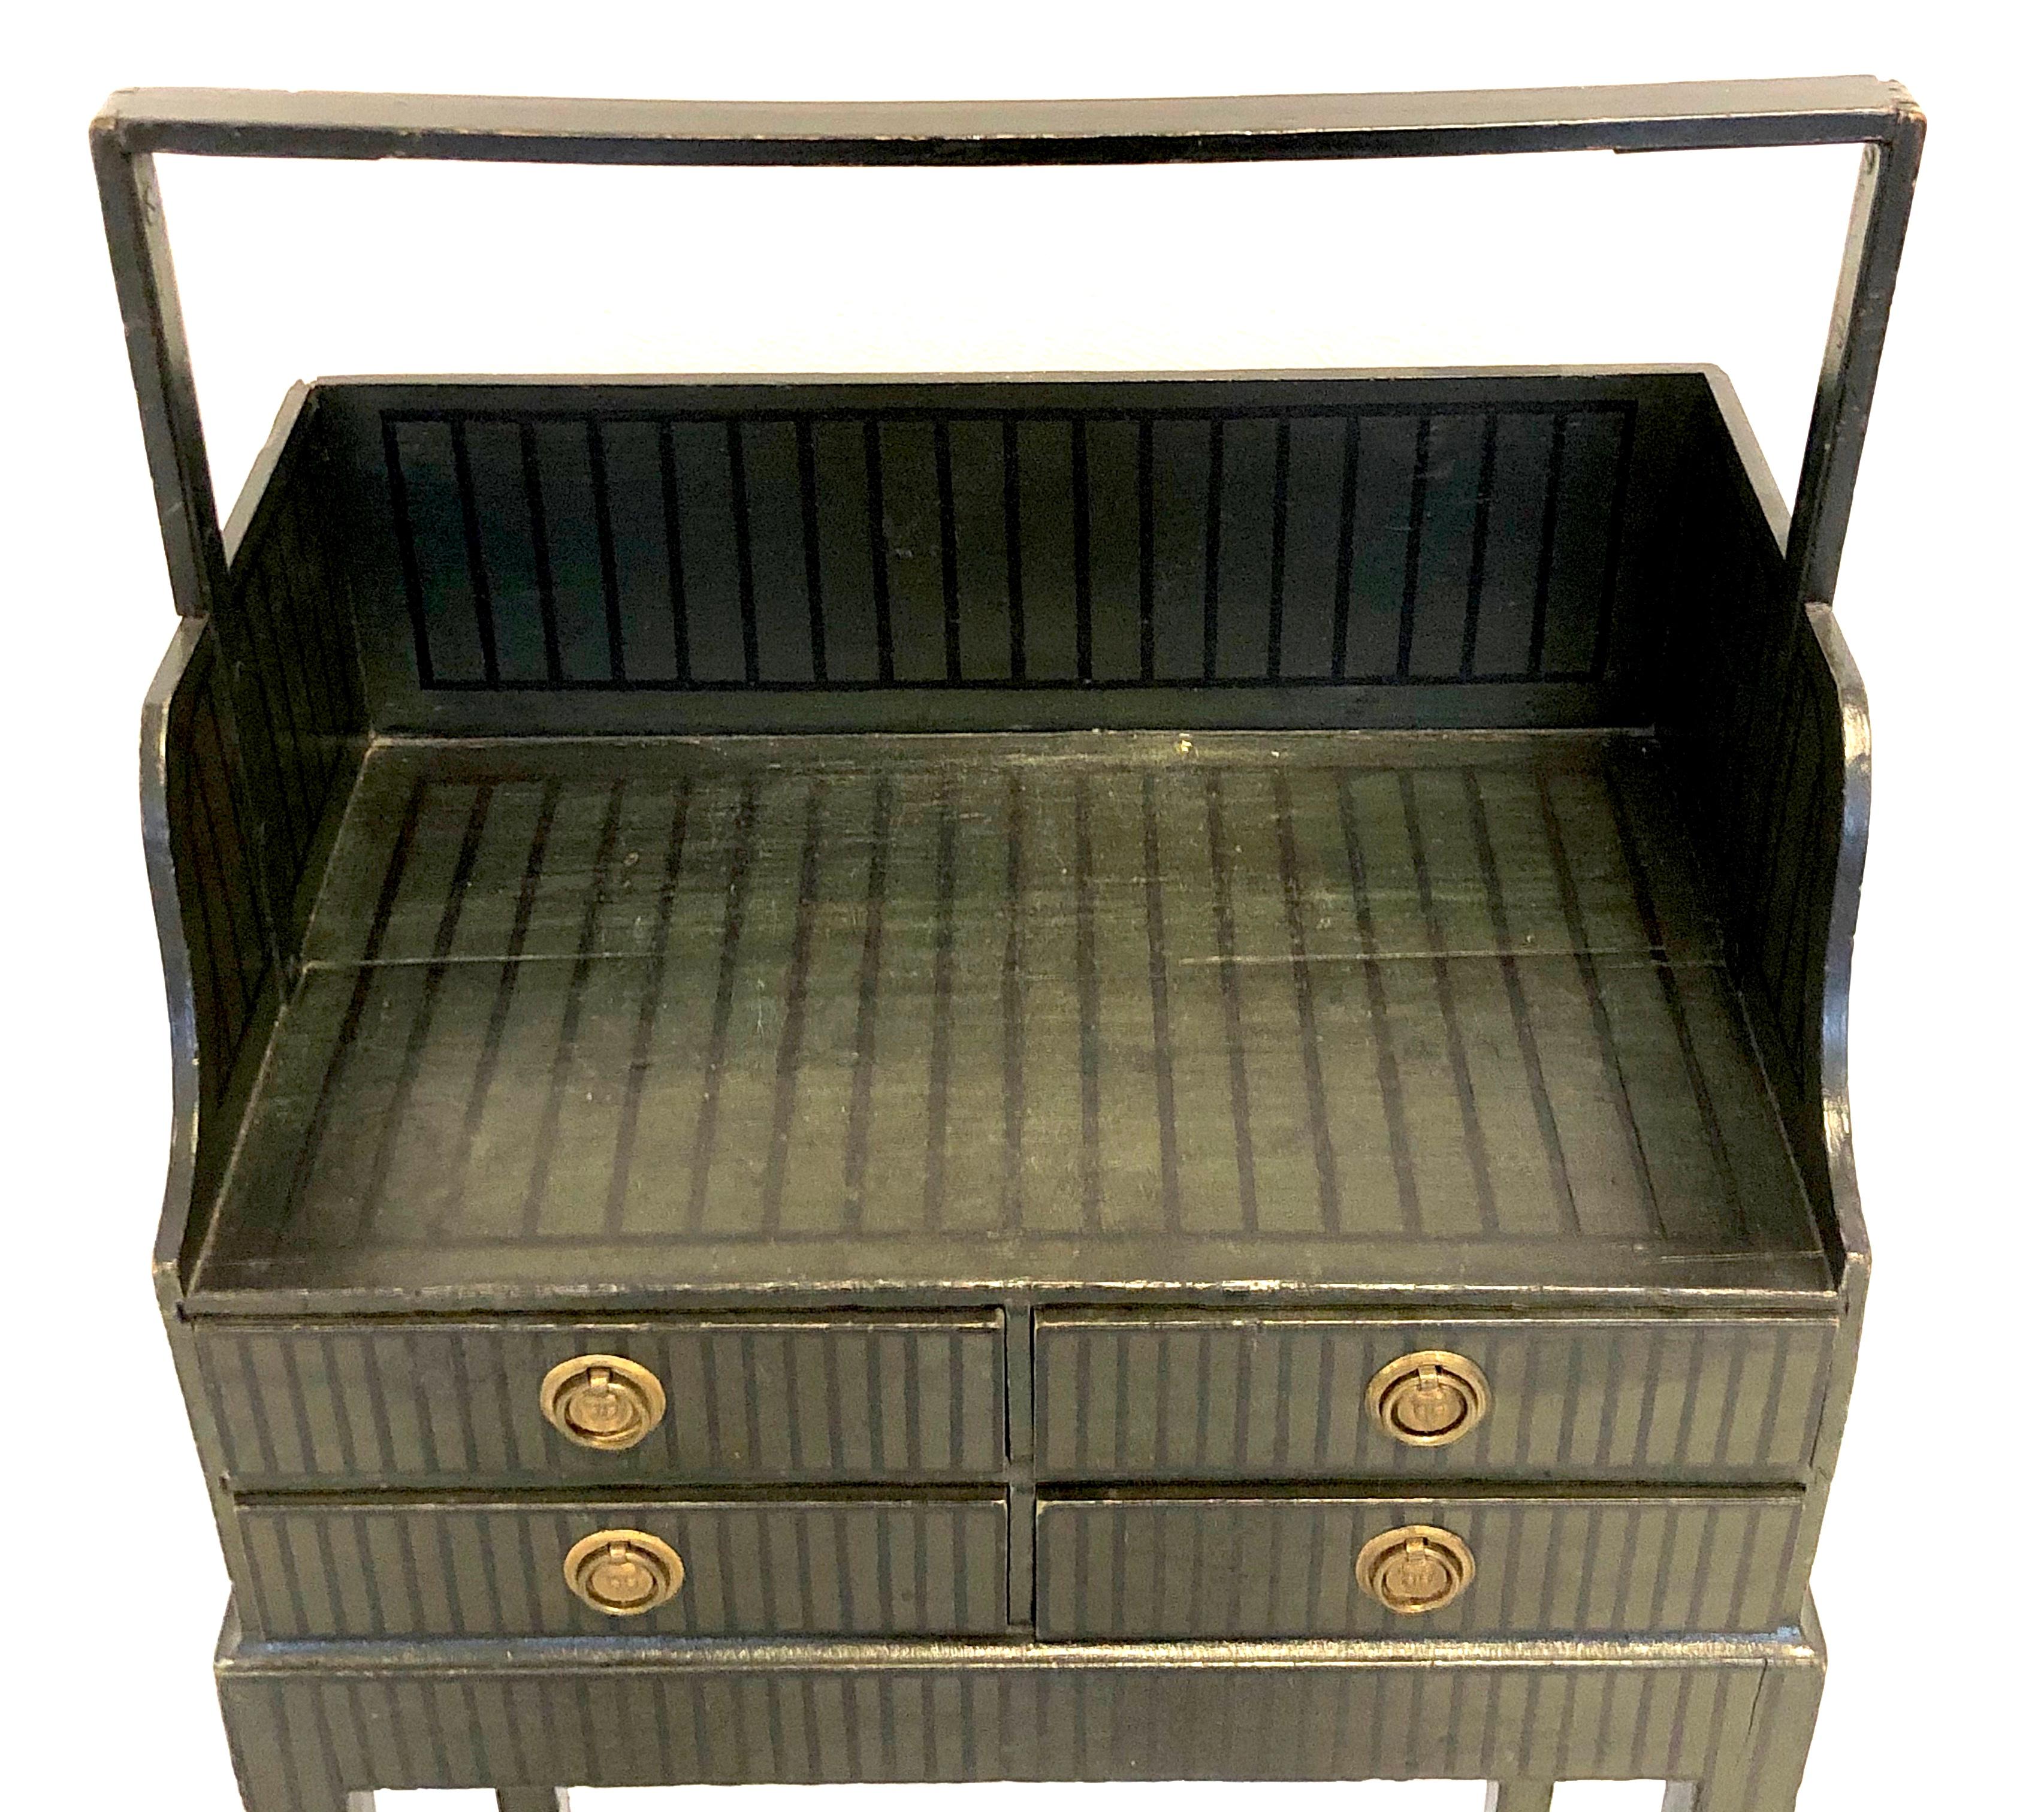 This extremely rare, one of a kind, so called 'Cheveret', is made in England in the Sheraton period, circa 1790, out of beechwood. It still has it's original dark green paint with black stripes. The four small drawers have their original round brass